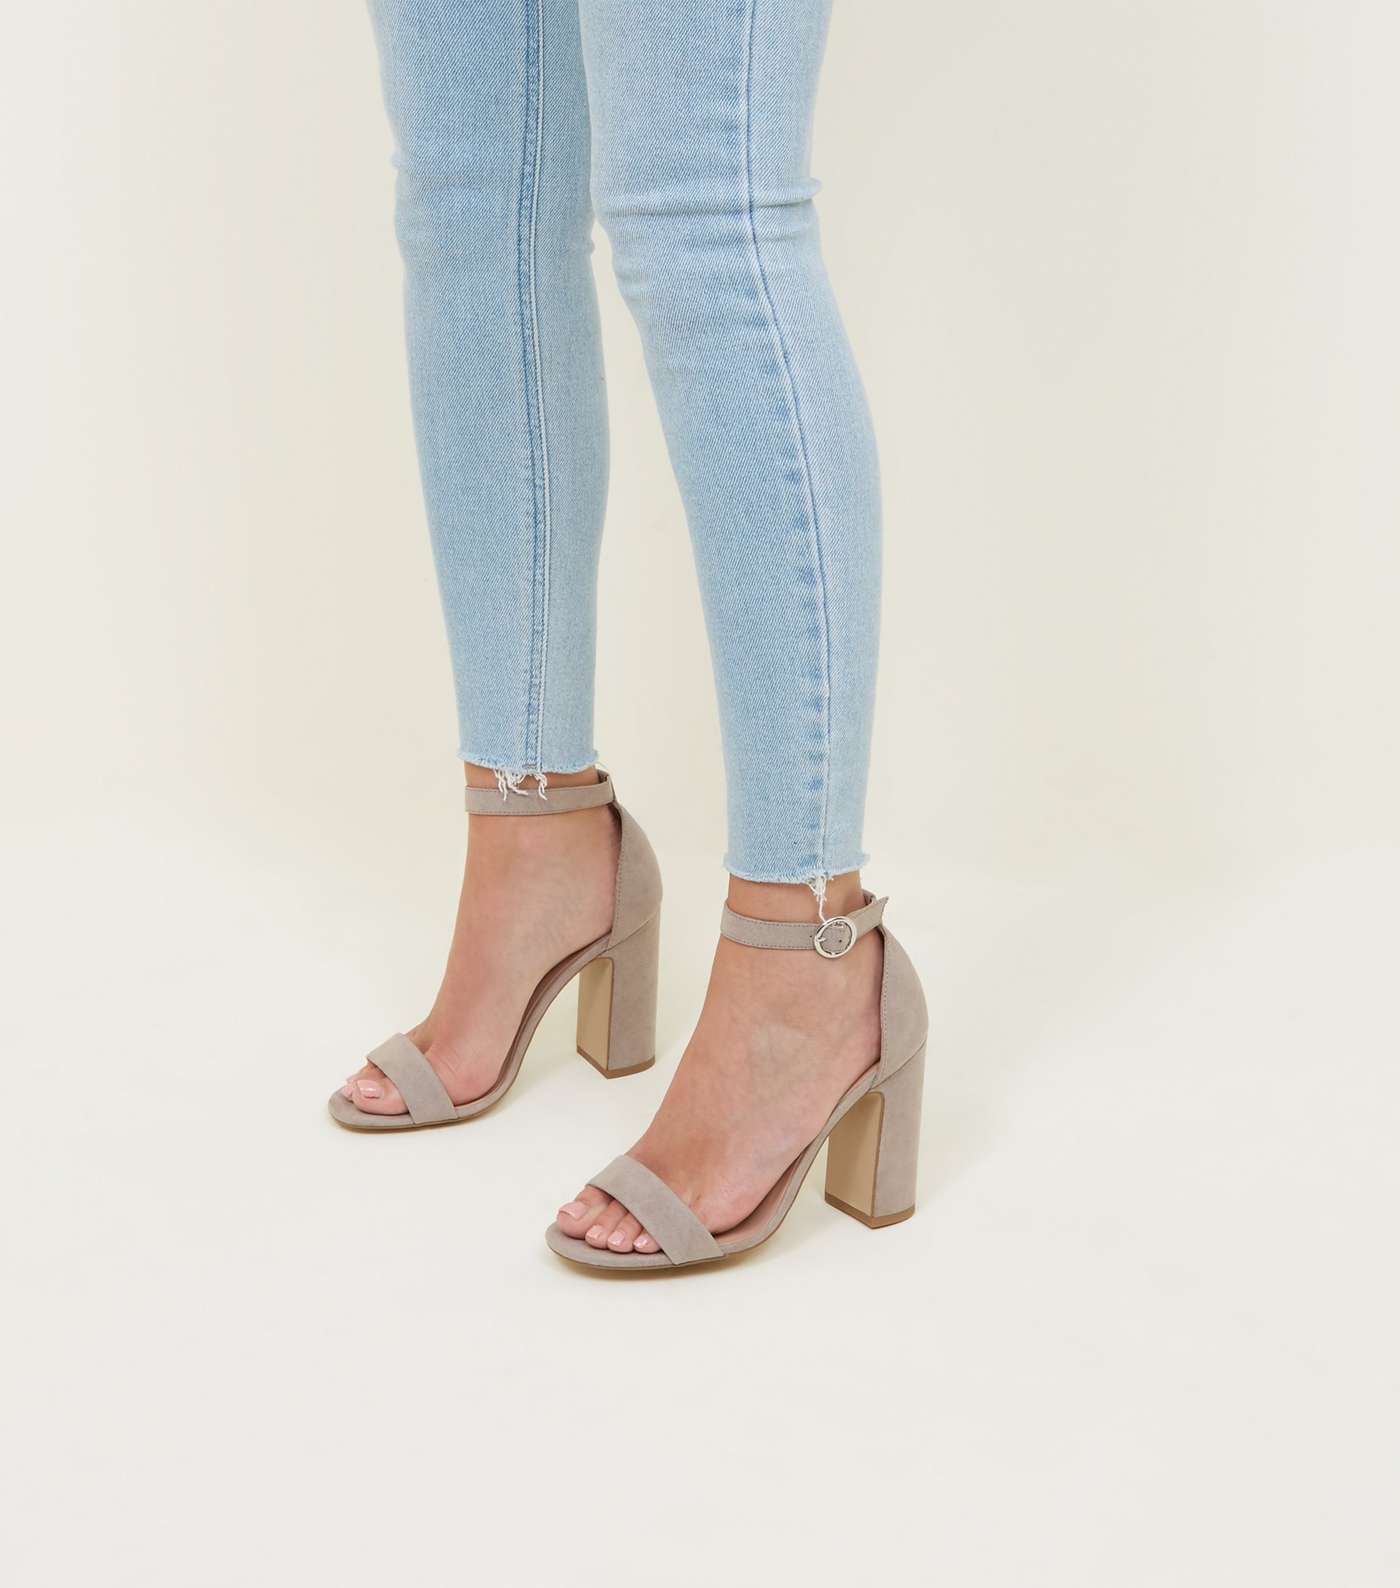 Grey Suedette Barely There Block Heels Image 2